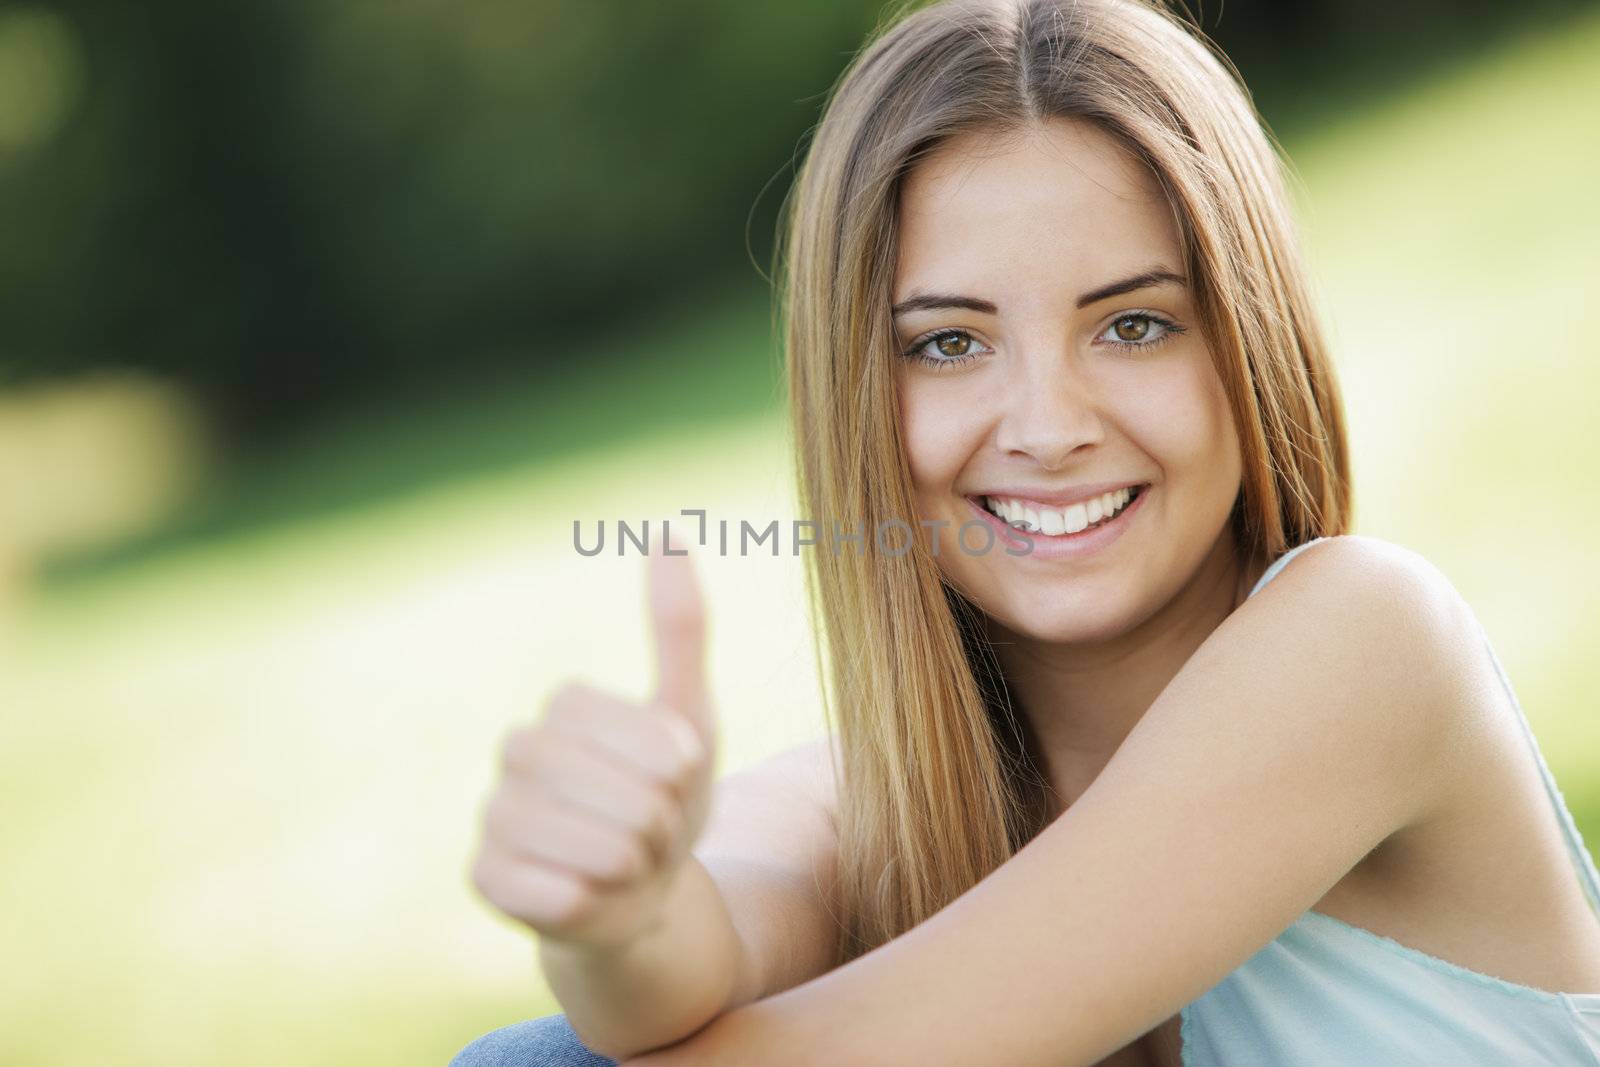 Beautiful young woman showing thumb up sign